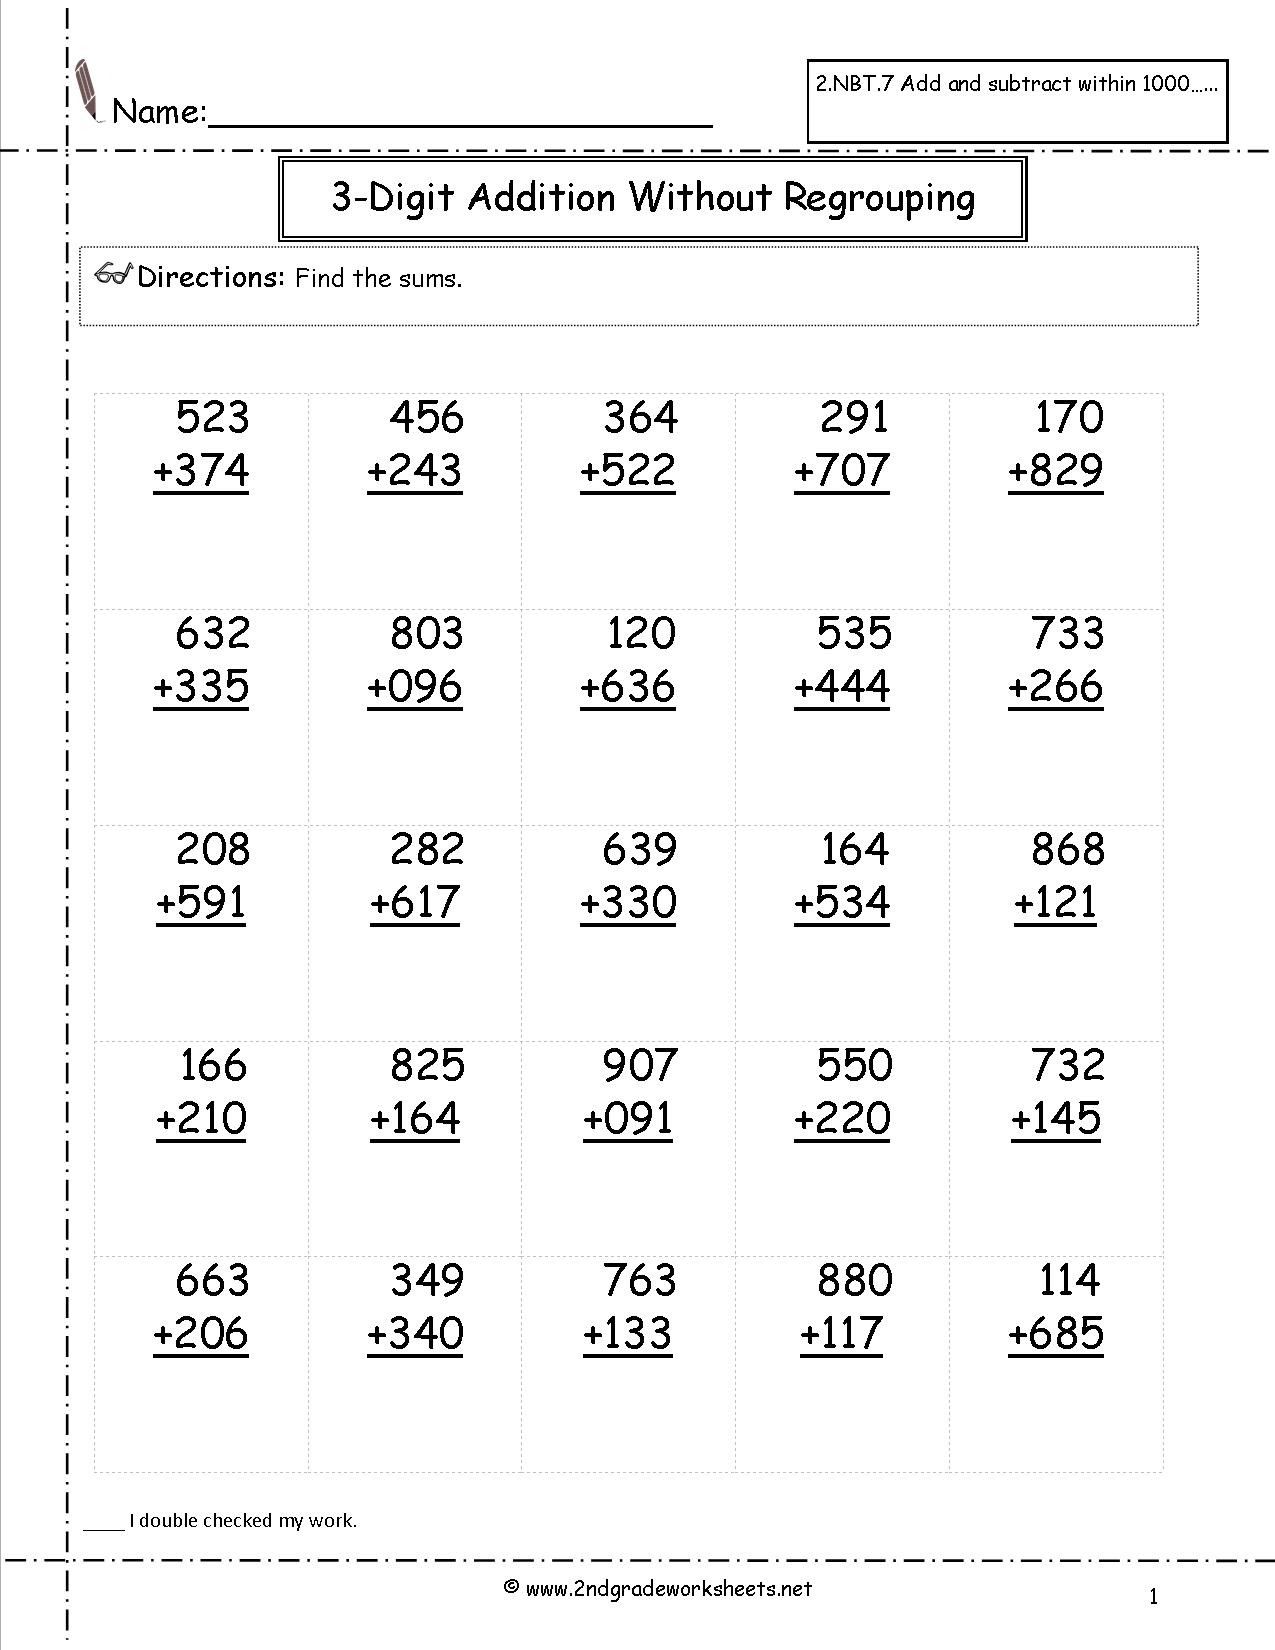 18 Best Images of By Addition Worksheet 1 - Single Digit ...